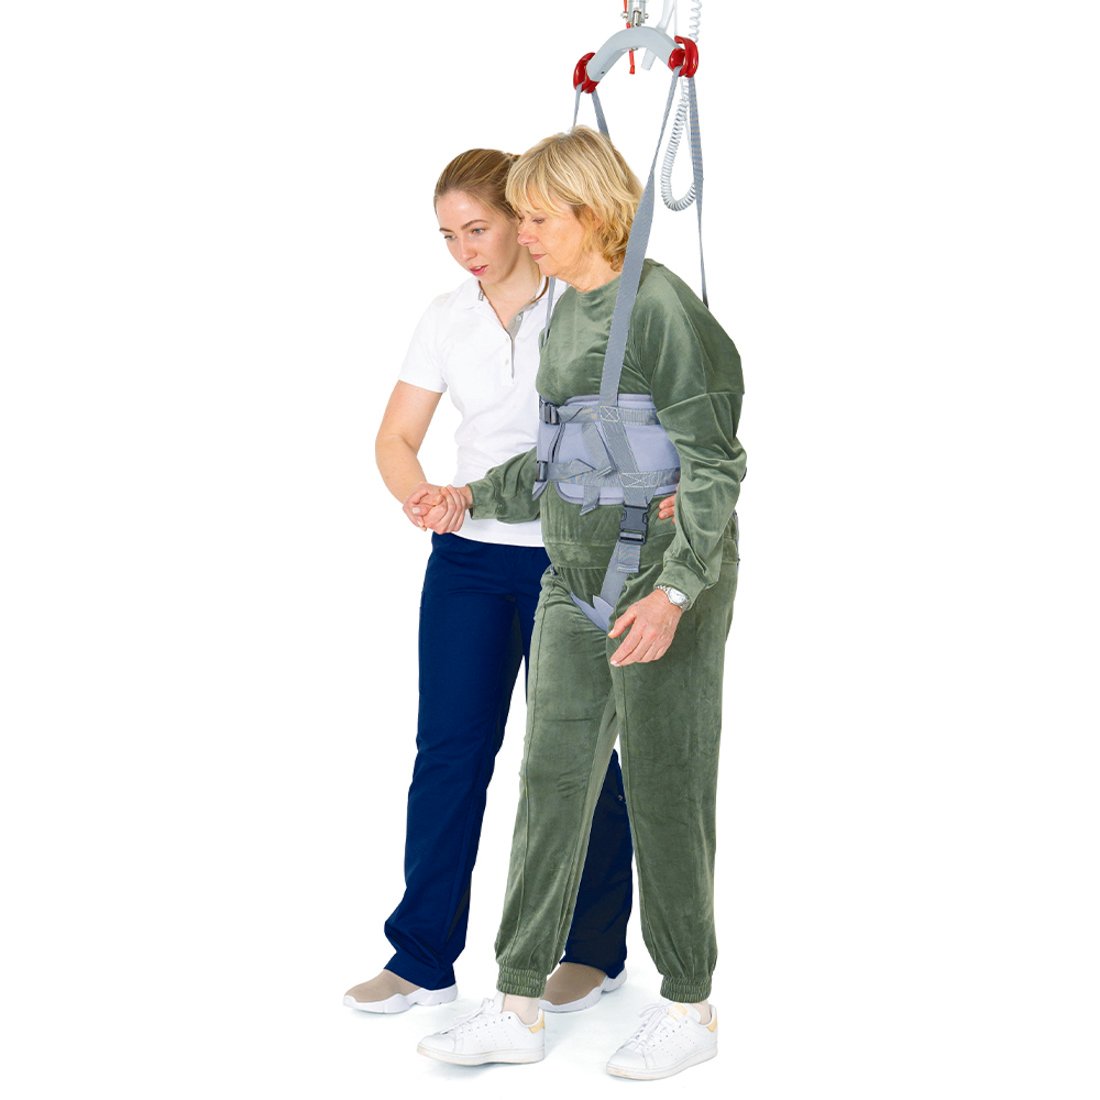 Molift UnoSling Ambulating Vest Carere and patient walking sideview